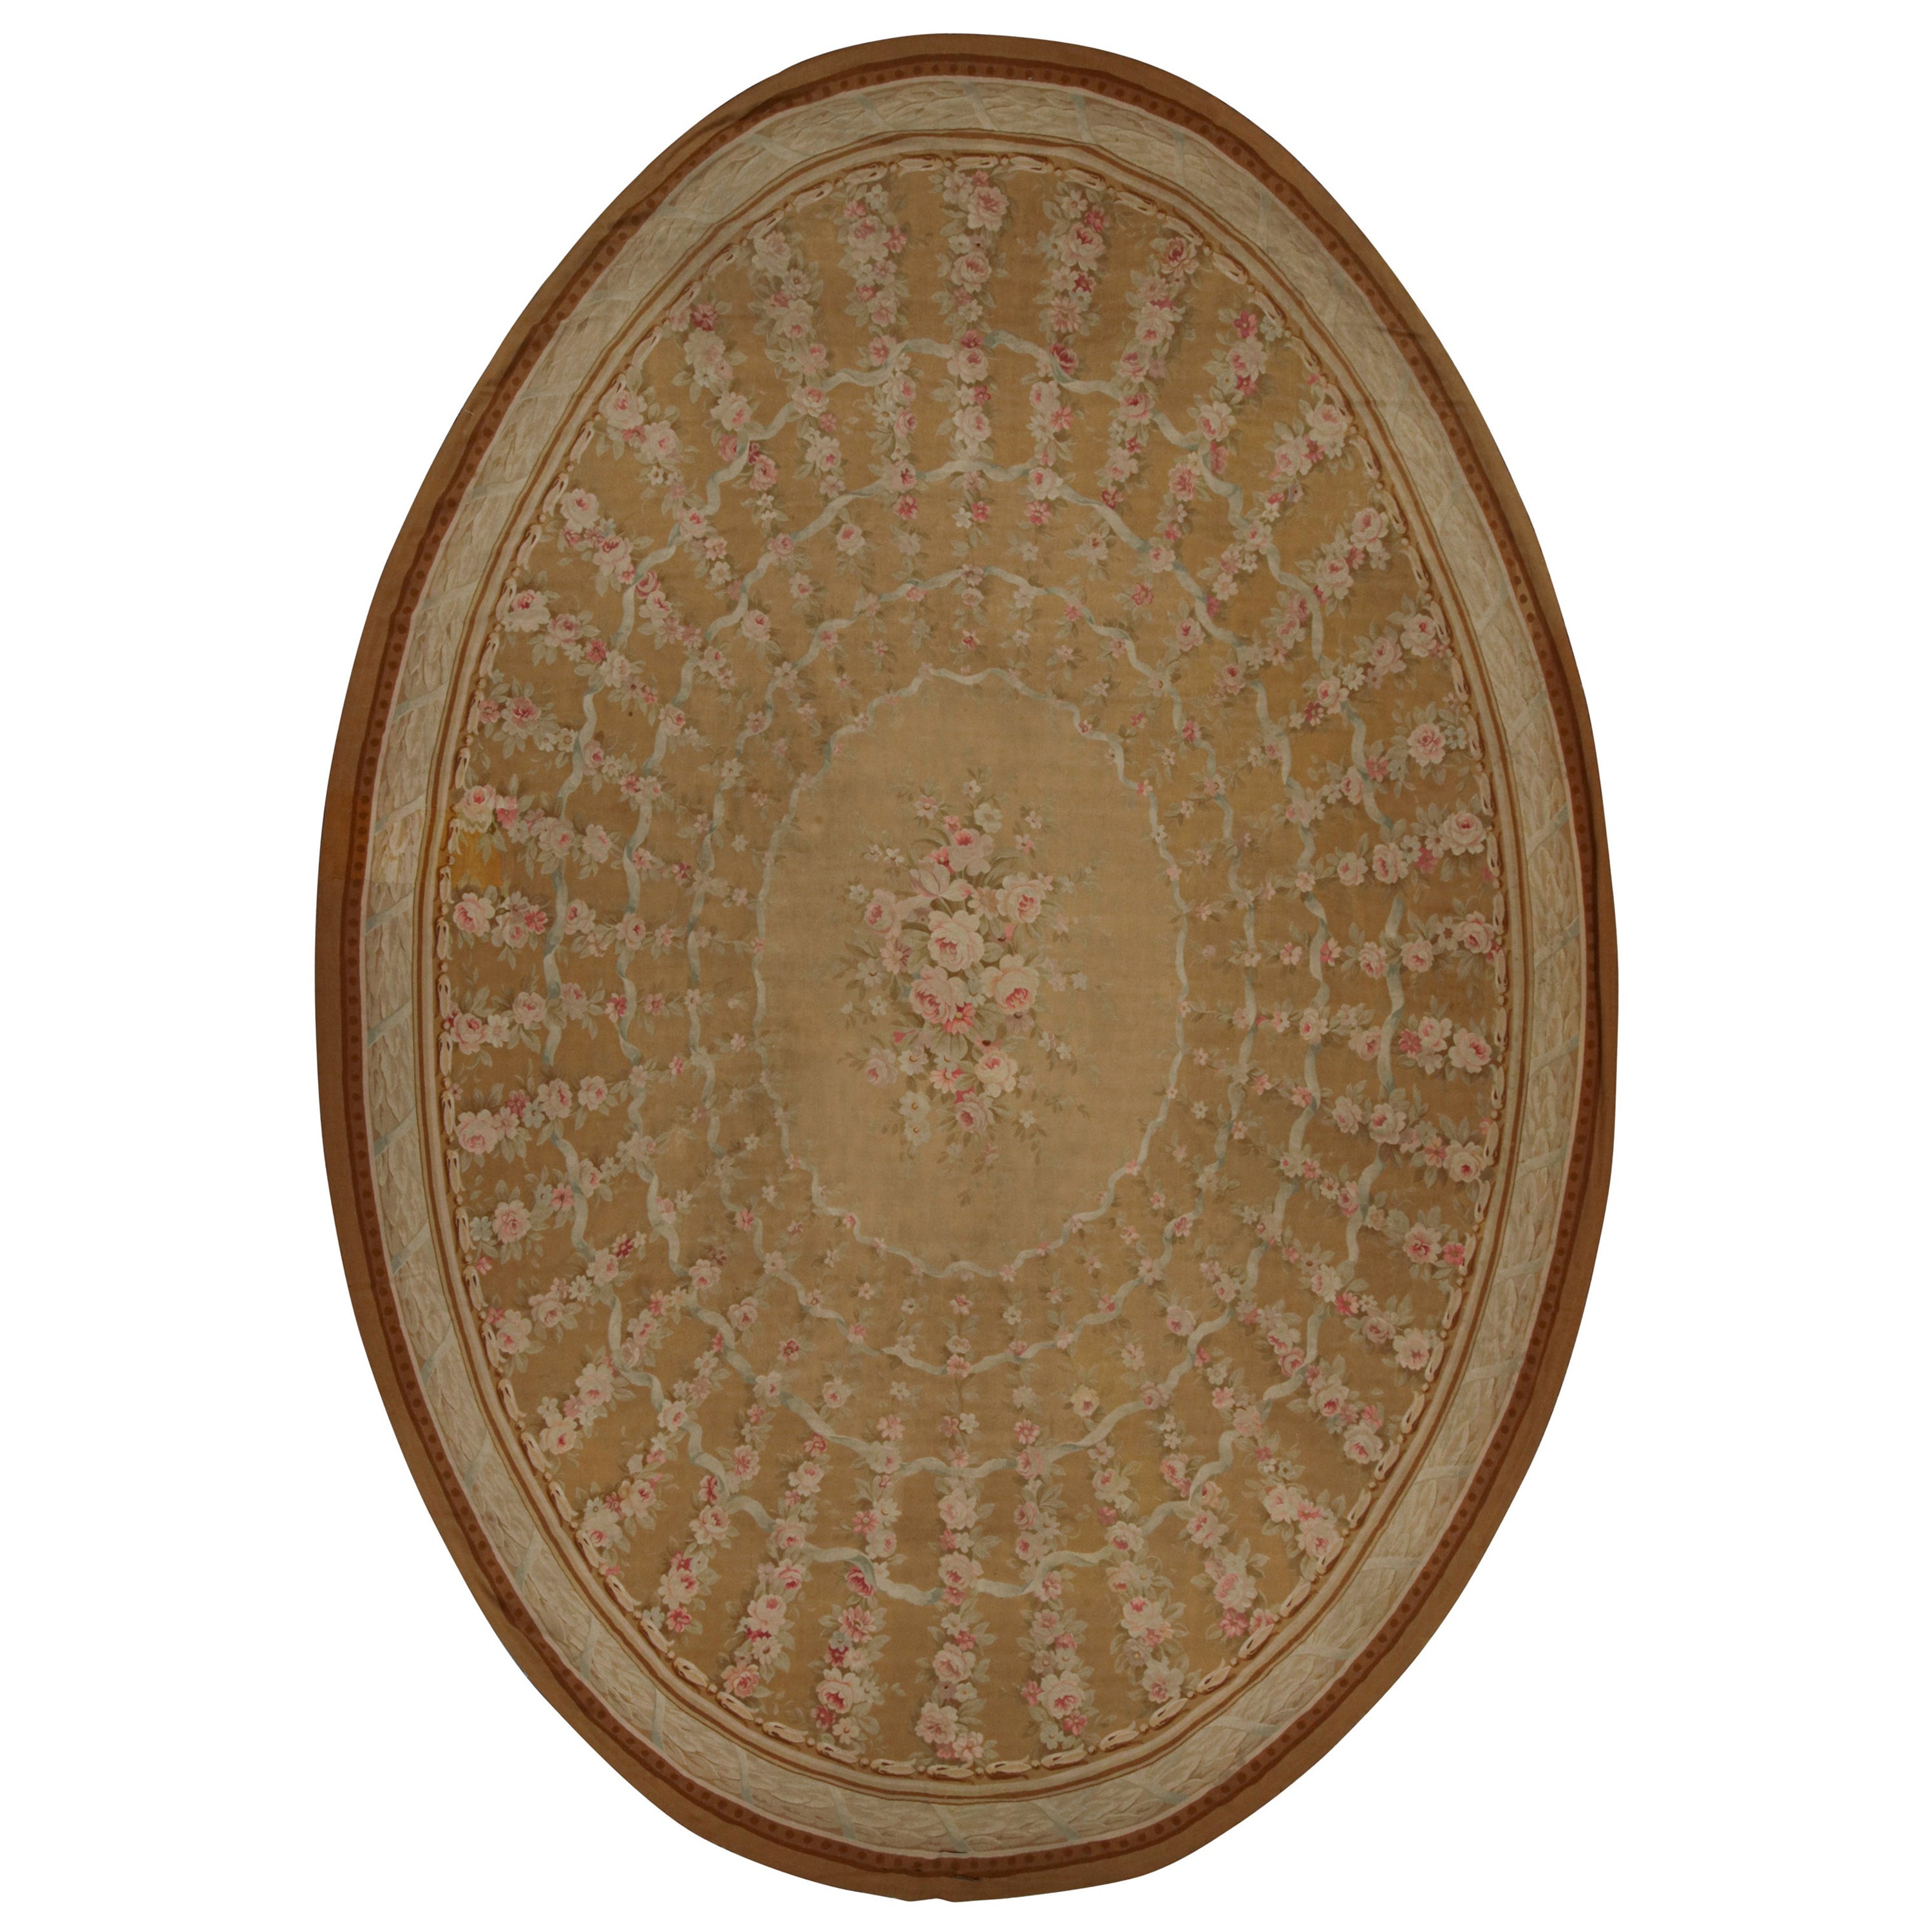 Antique Floral Aubusson Flatweave Oversized Oval Rug in Brown